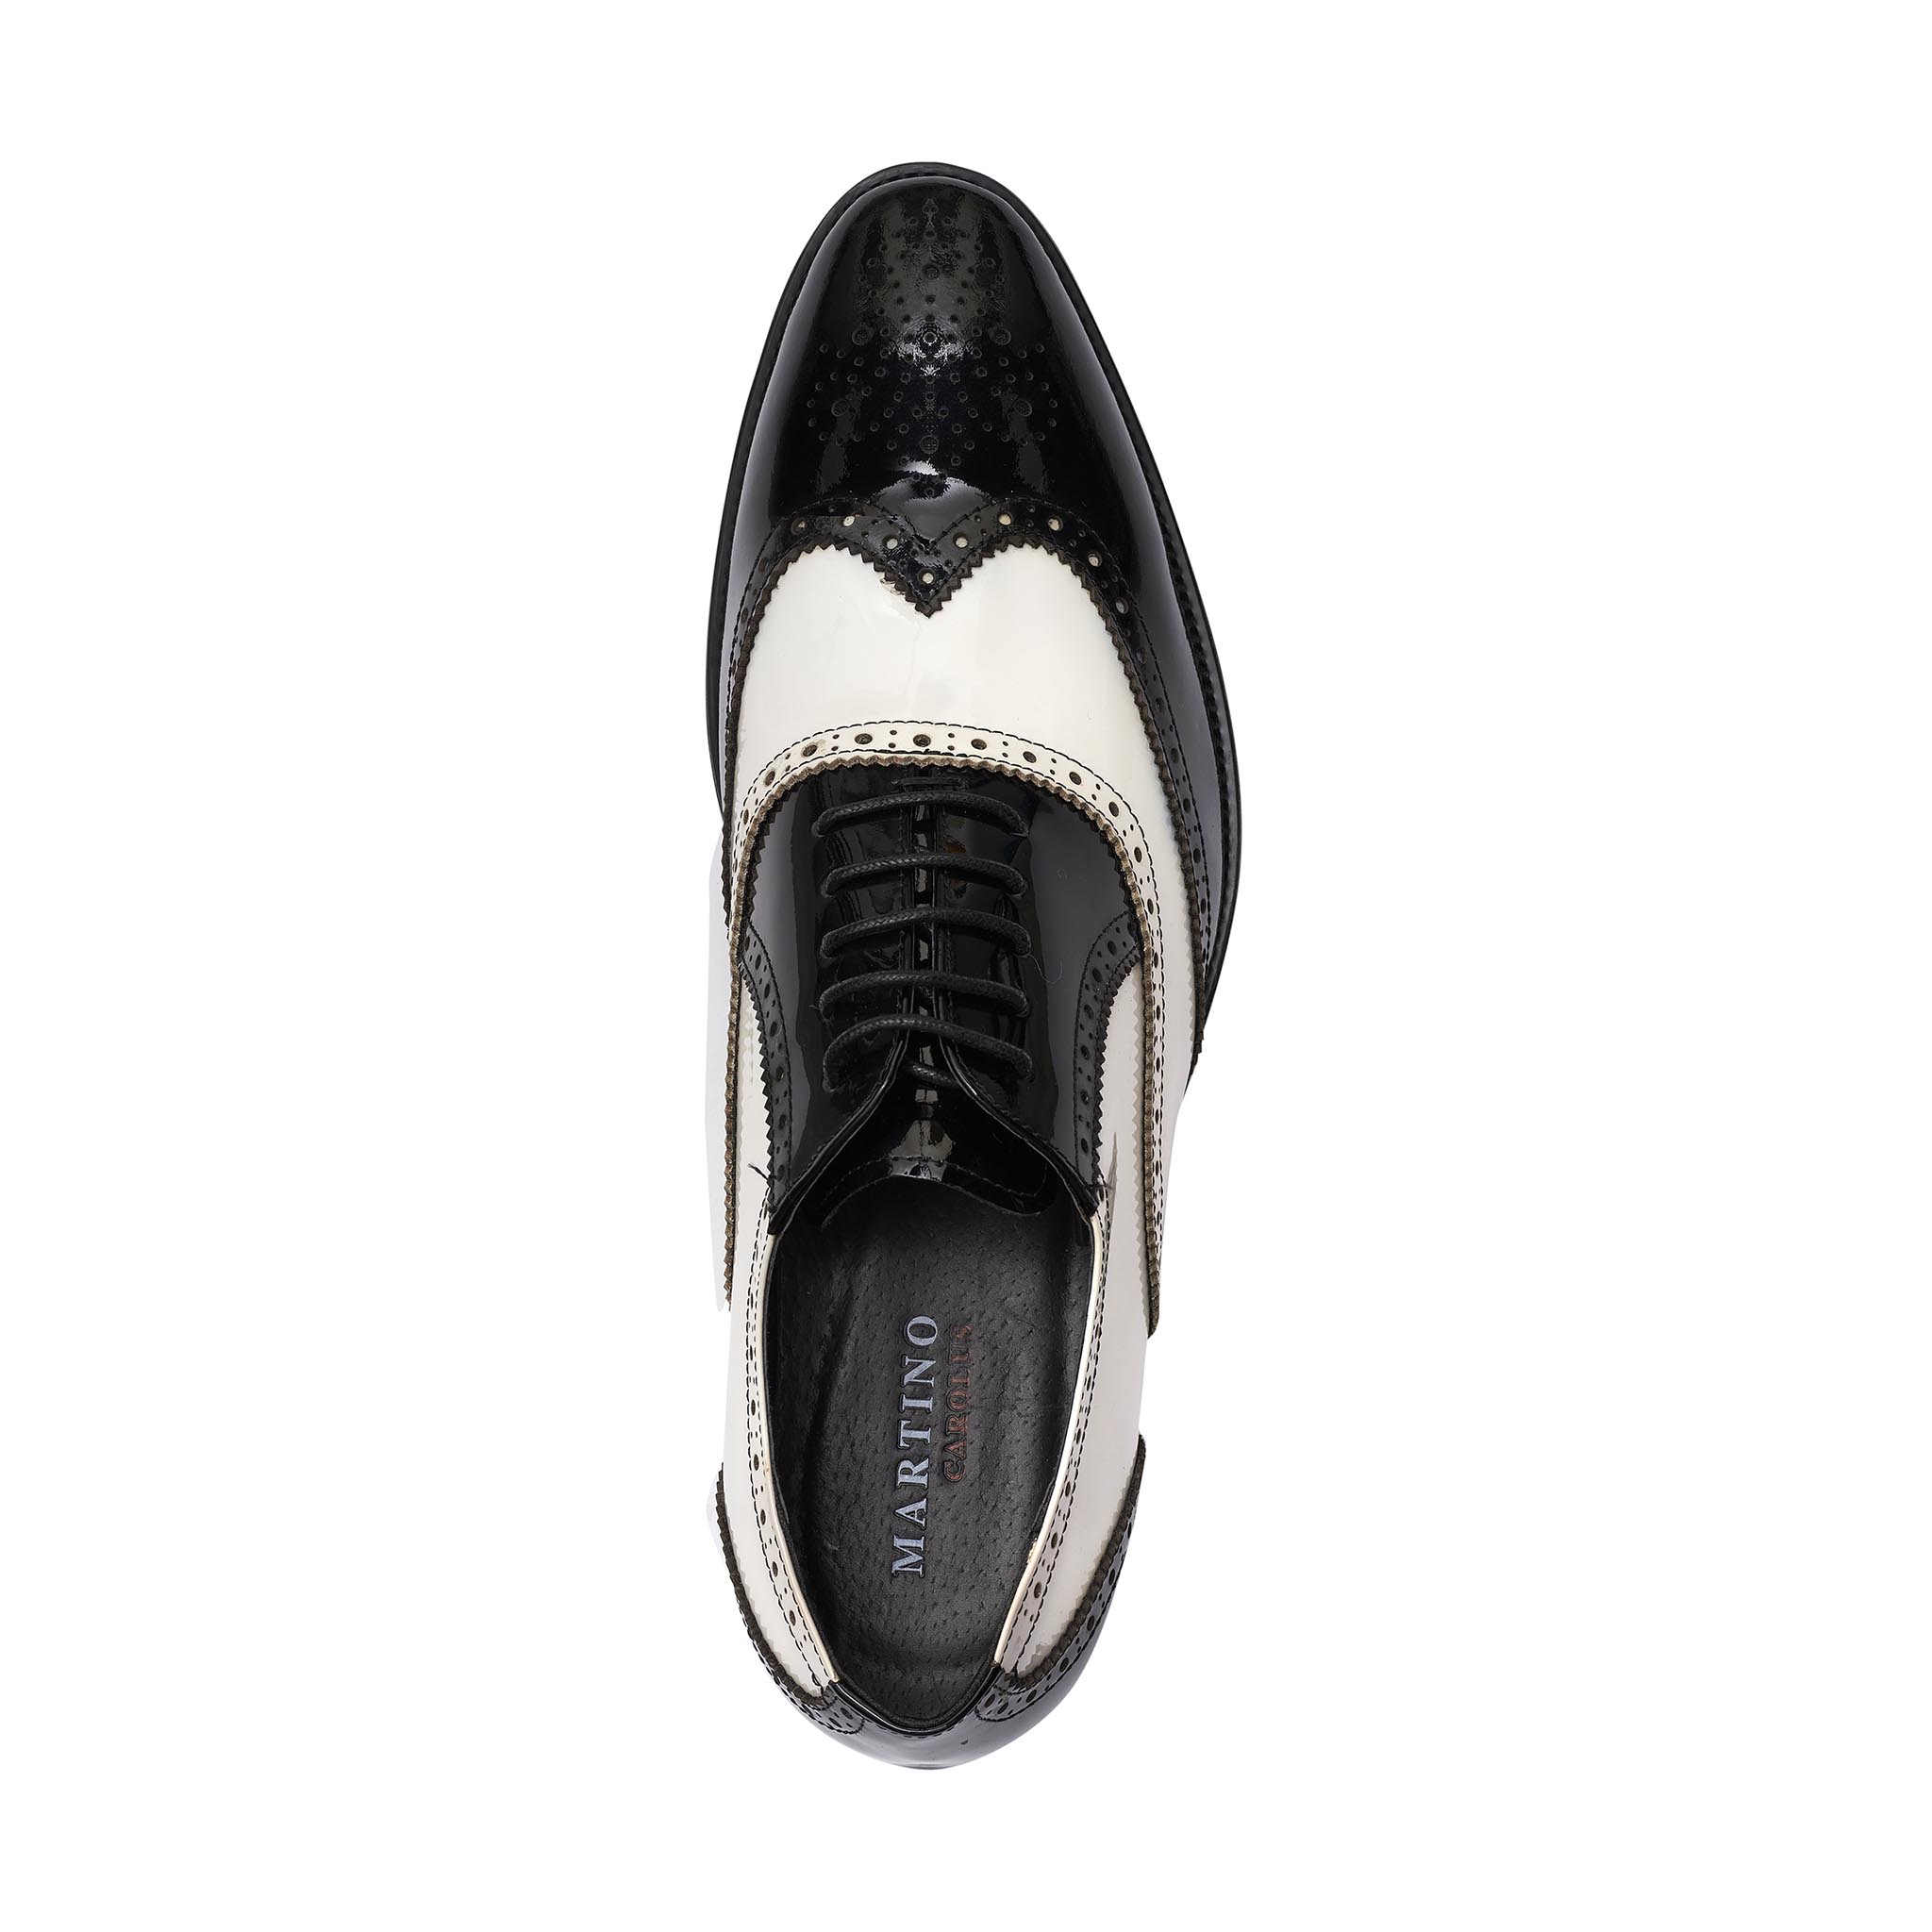 Black and White Patent Dancing Shoe